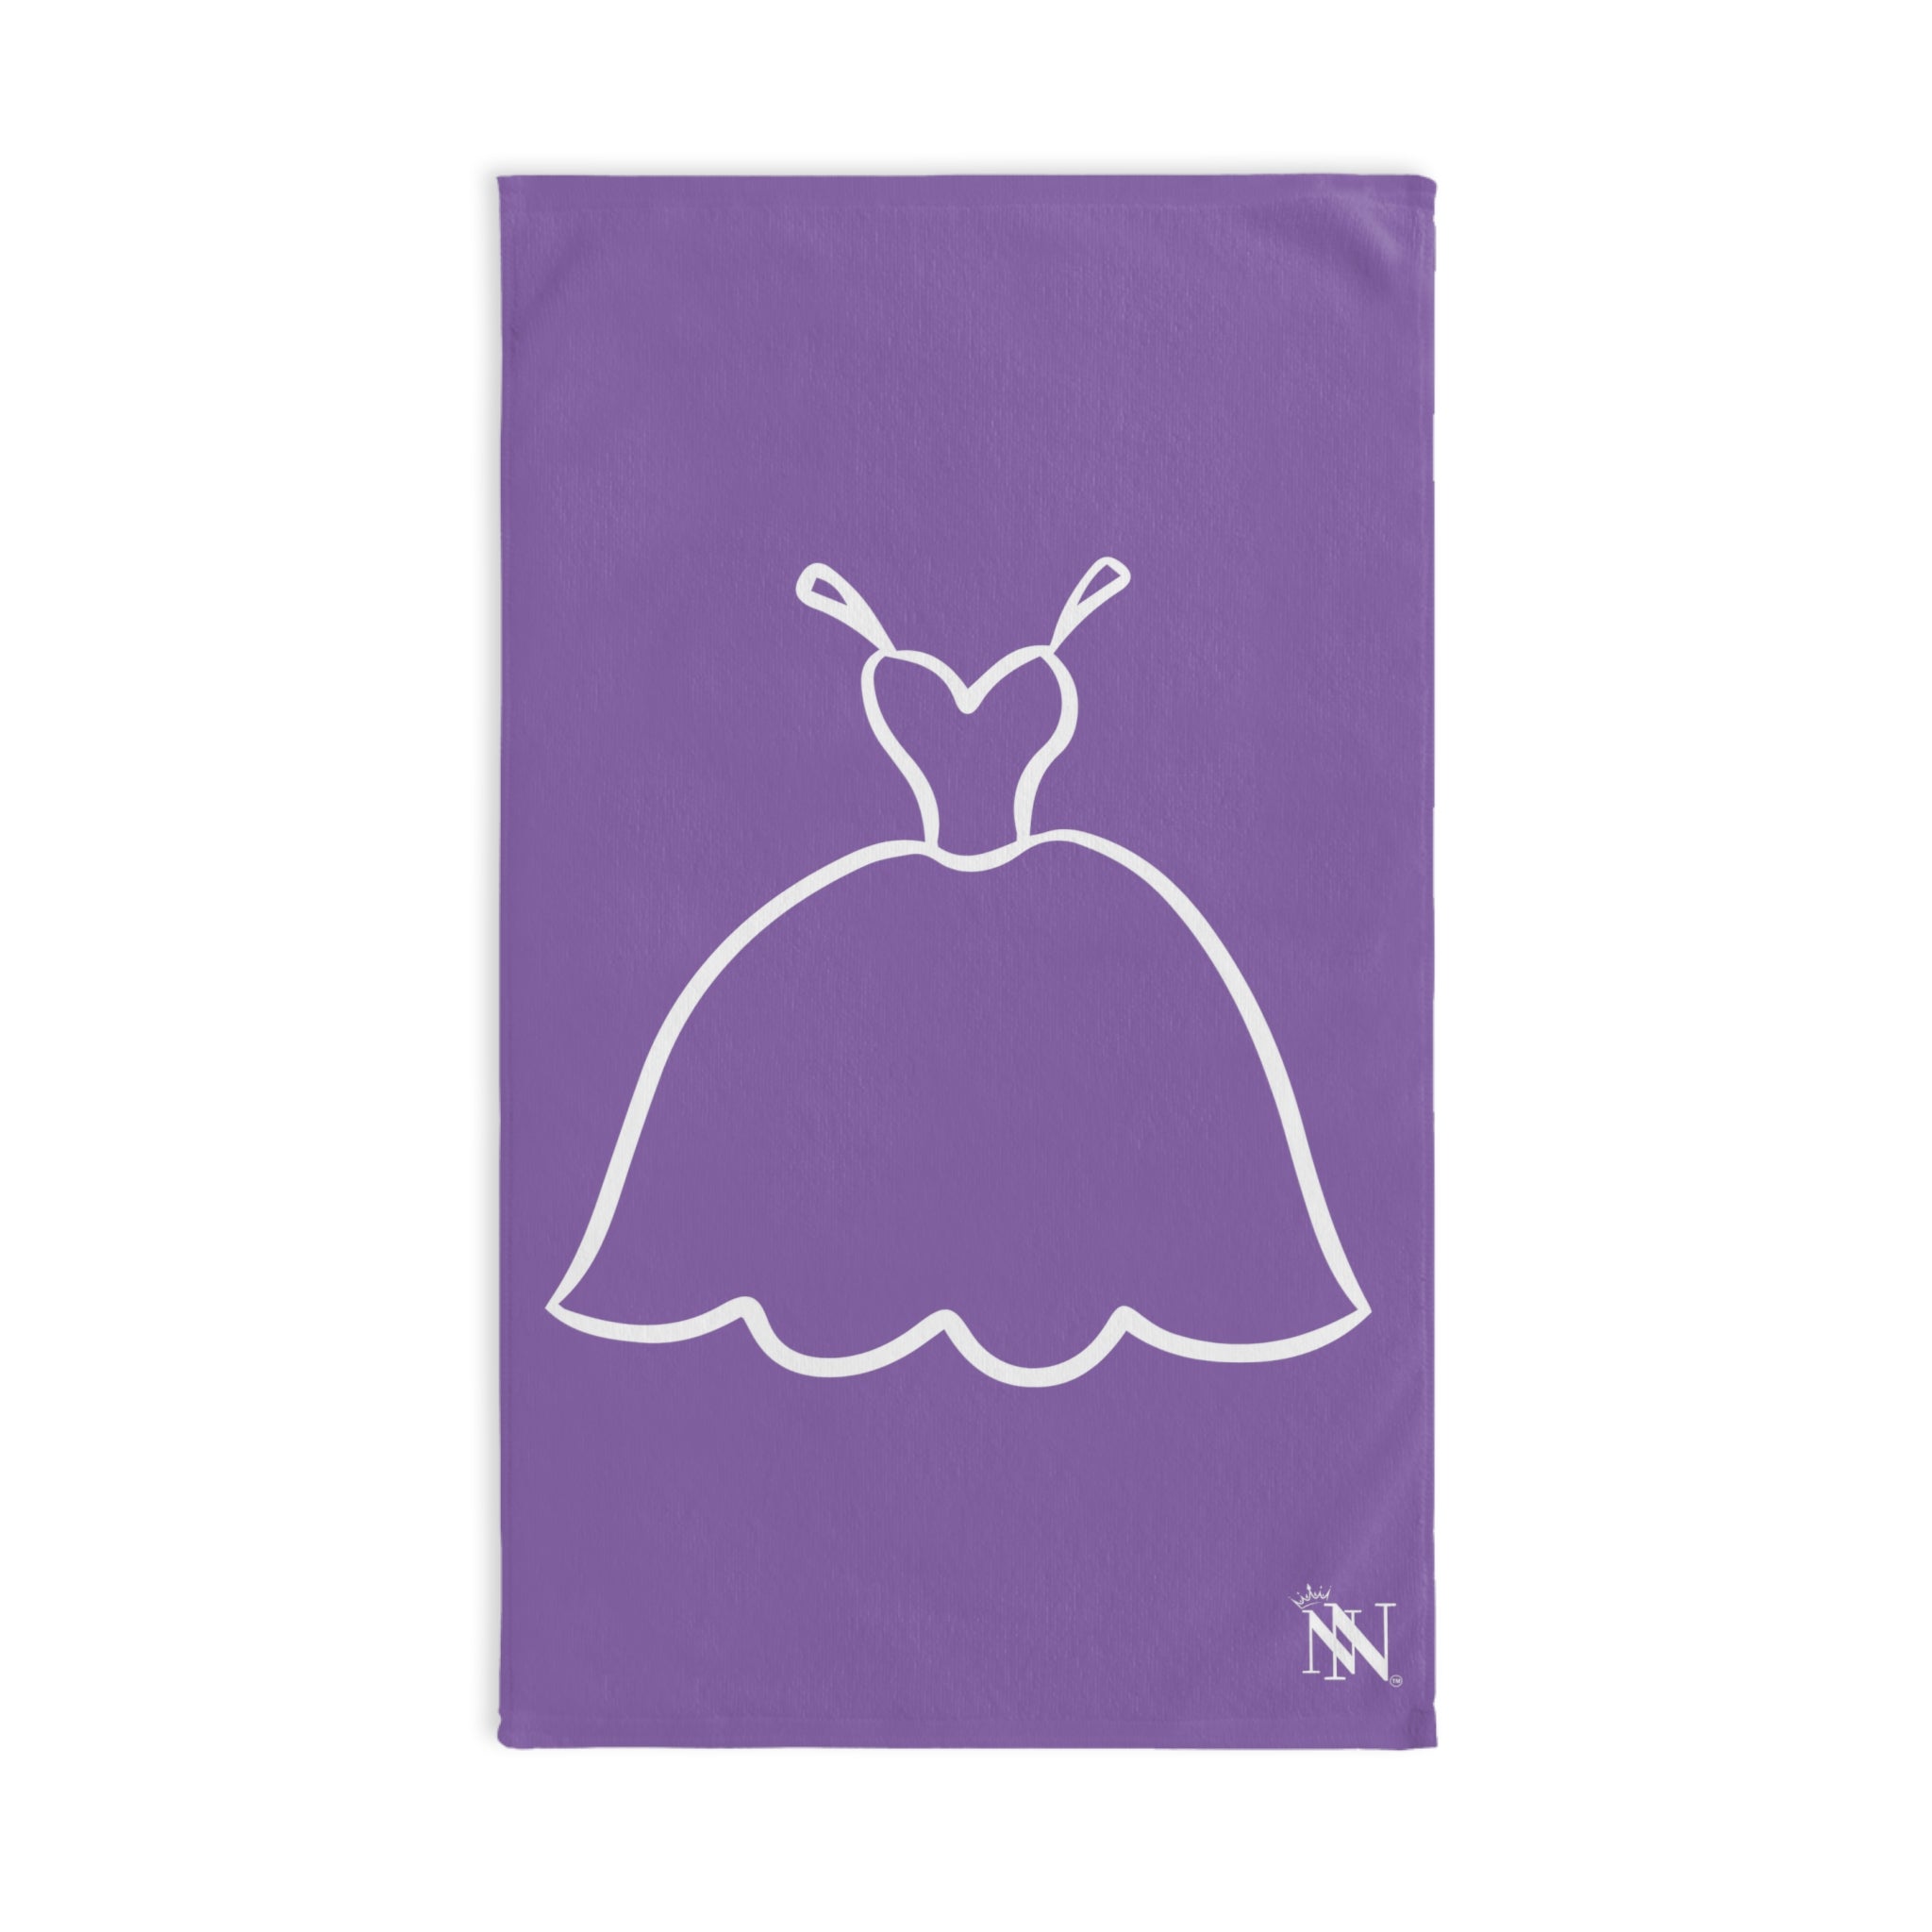 Bridal Gown Lavendar | Funny Gifts for Men - Gifts for Him - Birthday Gifts for Men, Him, Husband, Boyfriend, New Couple Gifts, Fathers & Valentines Day Gifts, Hand Towels NECTAR NAPKINS